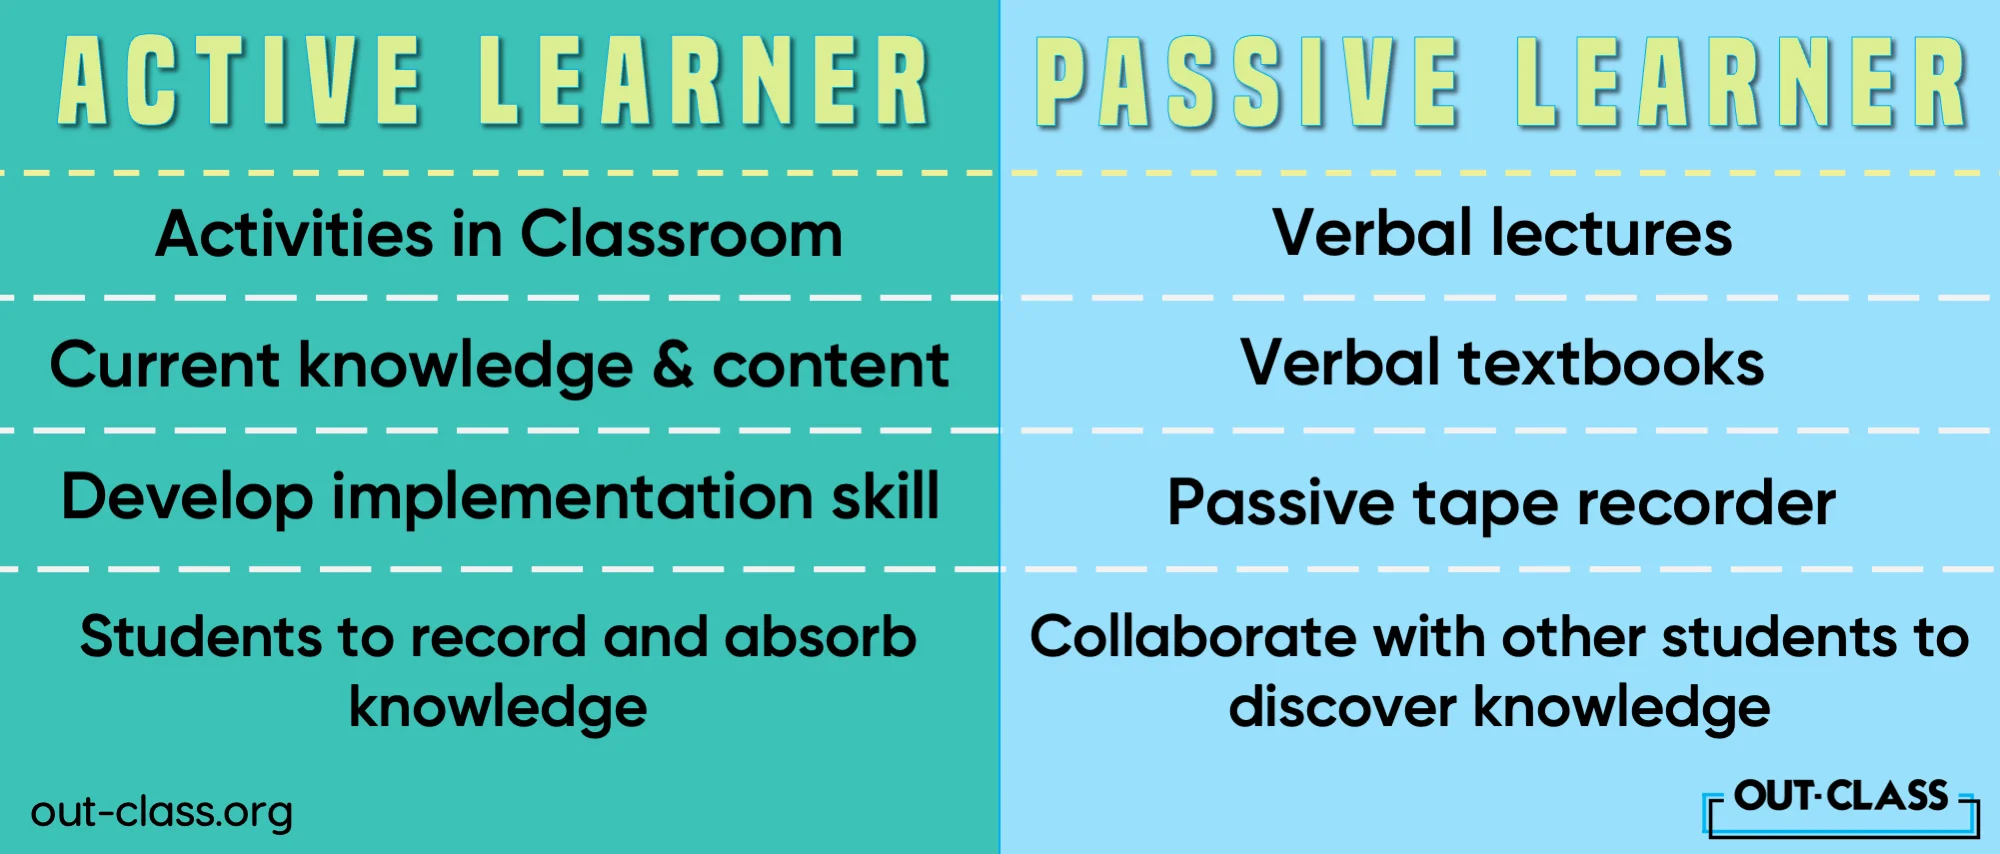 It shows the difference between passive learning and active learning in various learning styles. As well as provides passive learner and active learner examples.